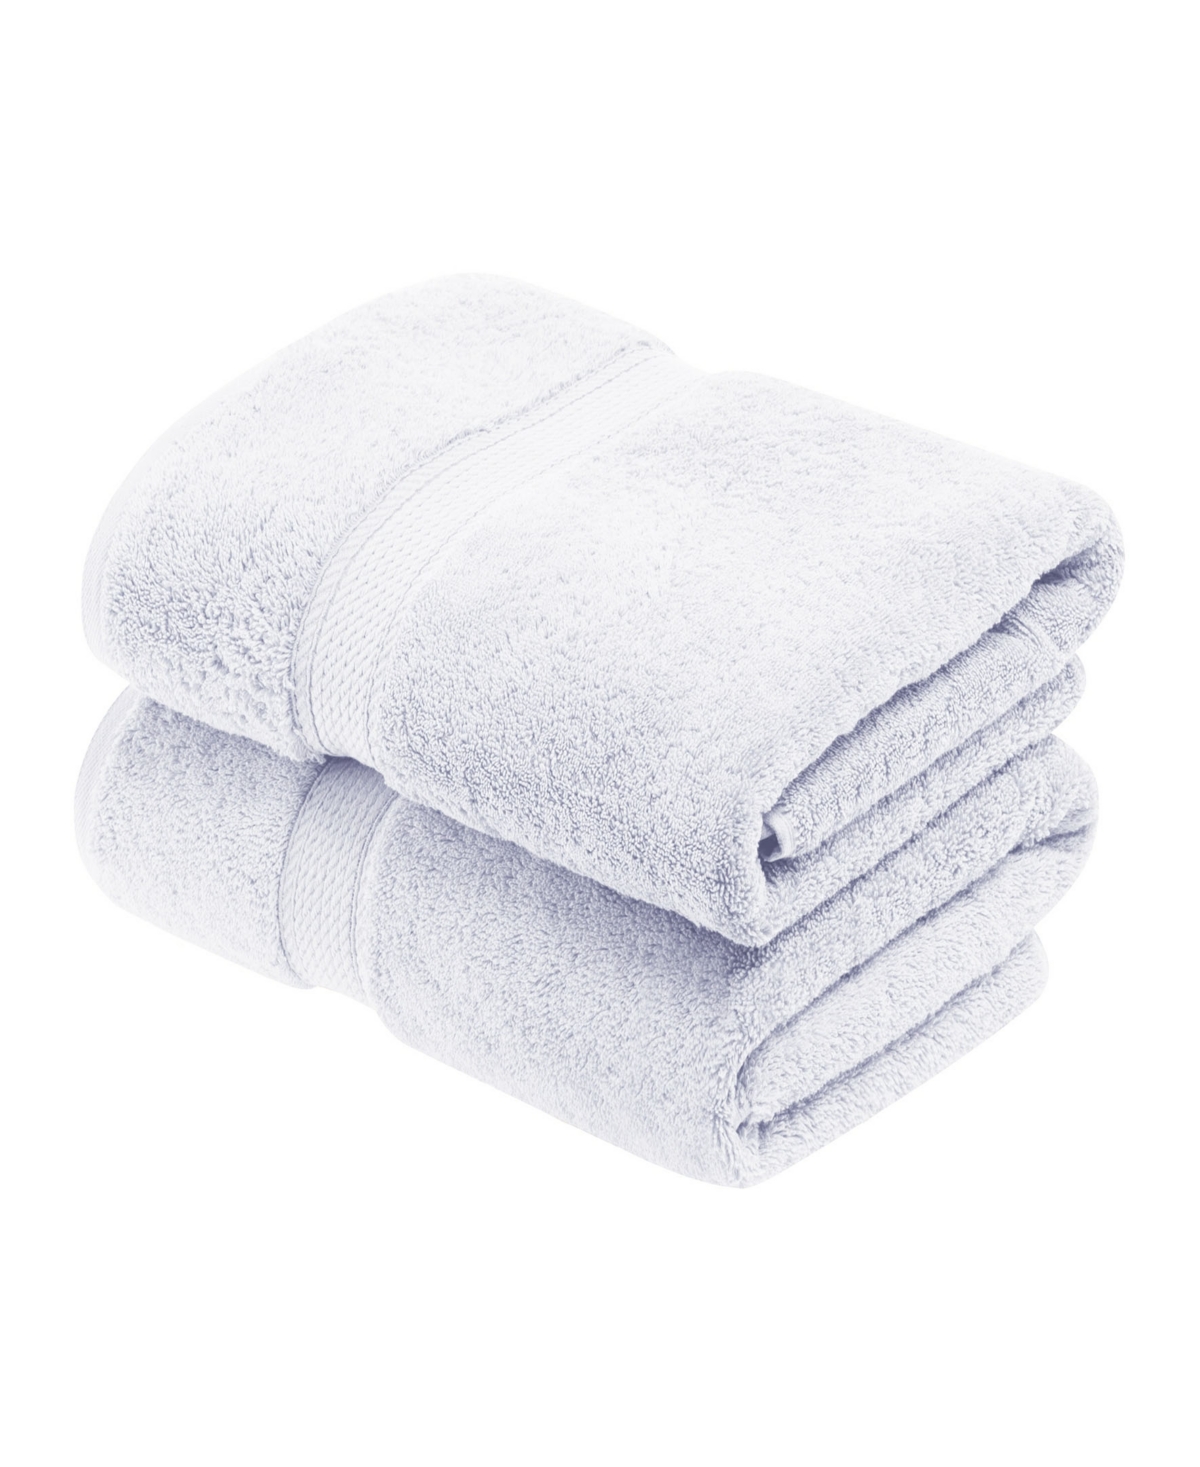 Superior Highly Absorbent Egyptian Cotton 2-piece Ultra Plush Solid Bath Towel Set Bedding In White